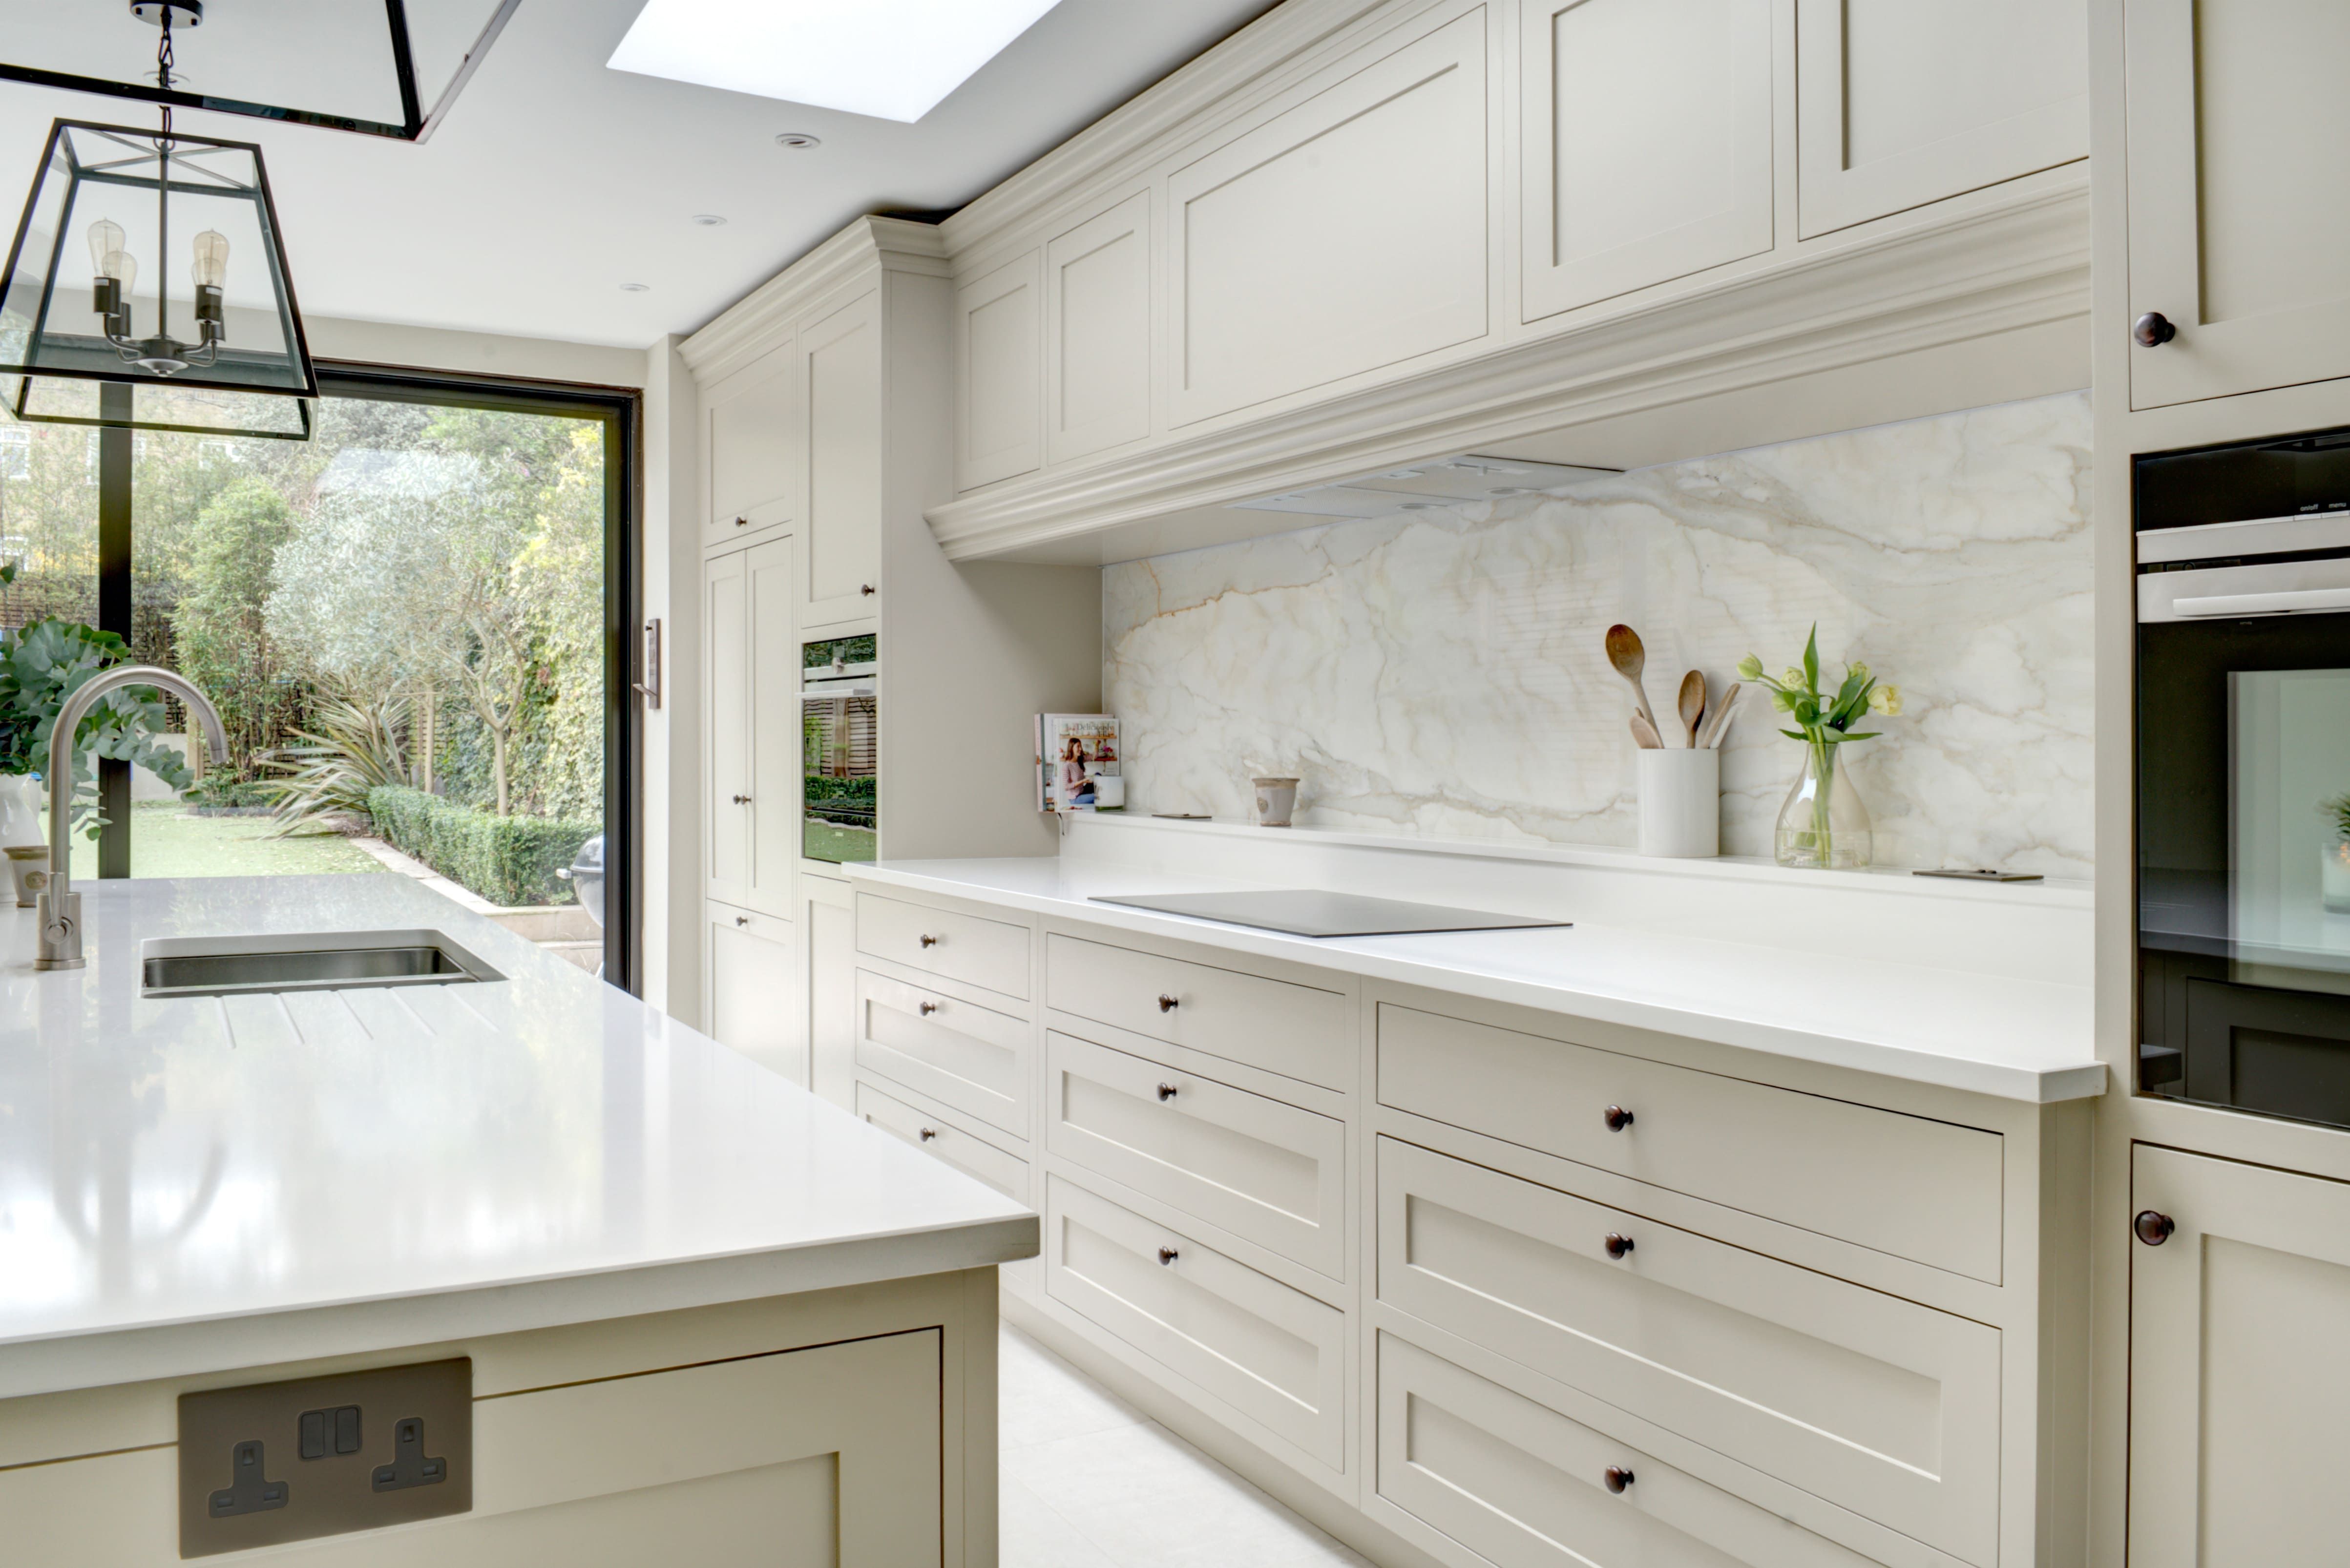 A cream and white bespoke kitchen is bathed in natural light from a floor-to-ceiling patio door, opening to a large, well-kept garden.